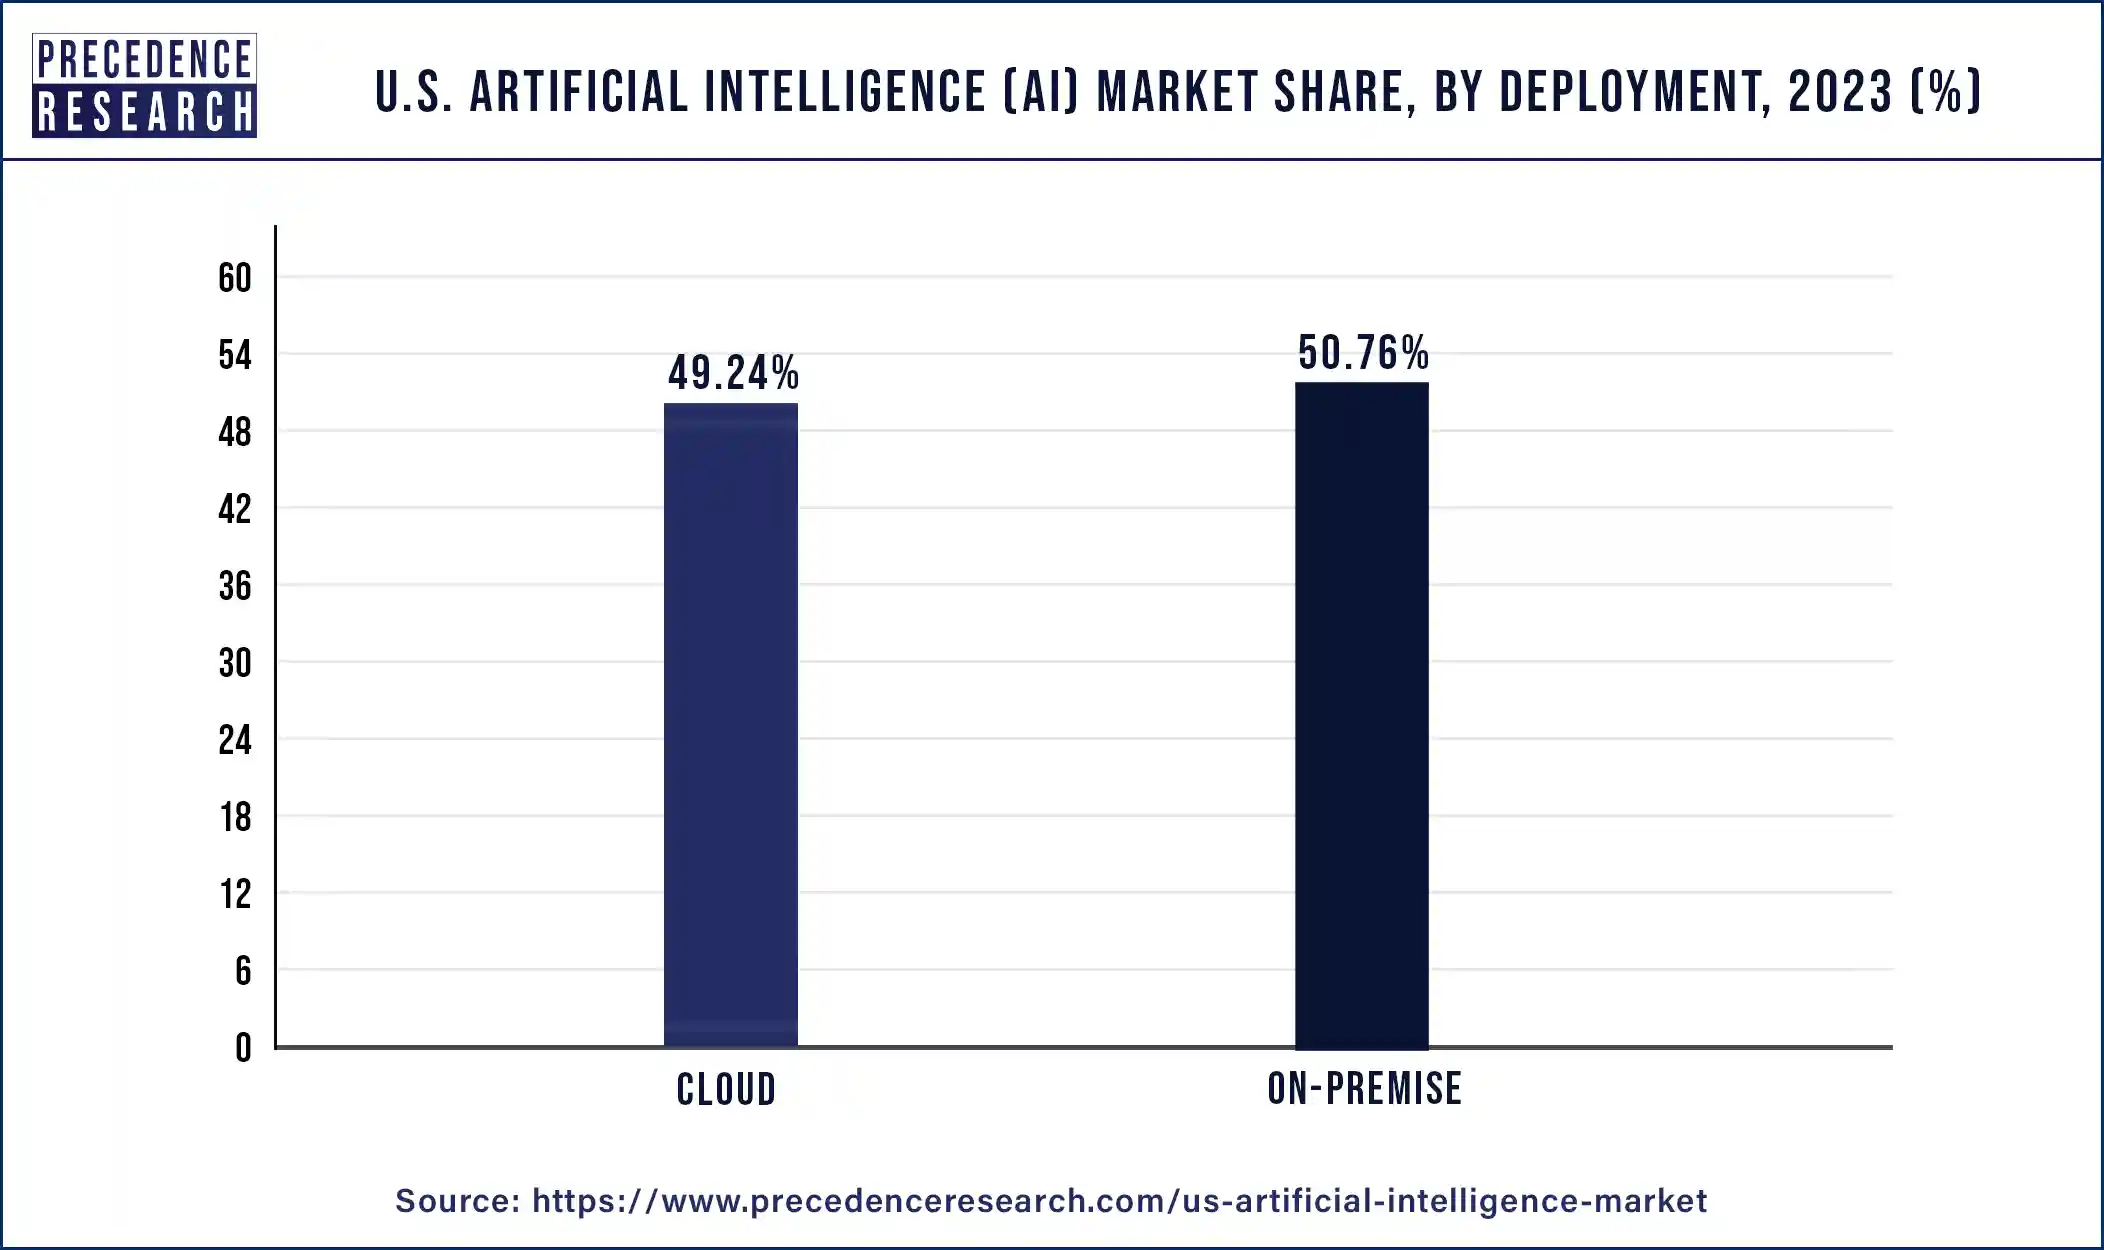 U.S. Artificial Intelligence (AI) Market Share, By Deployment, 2023 (%)